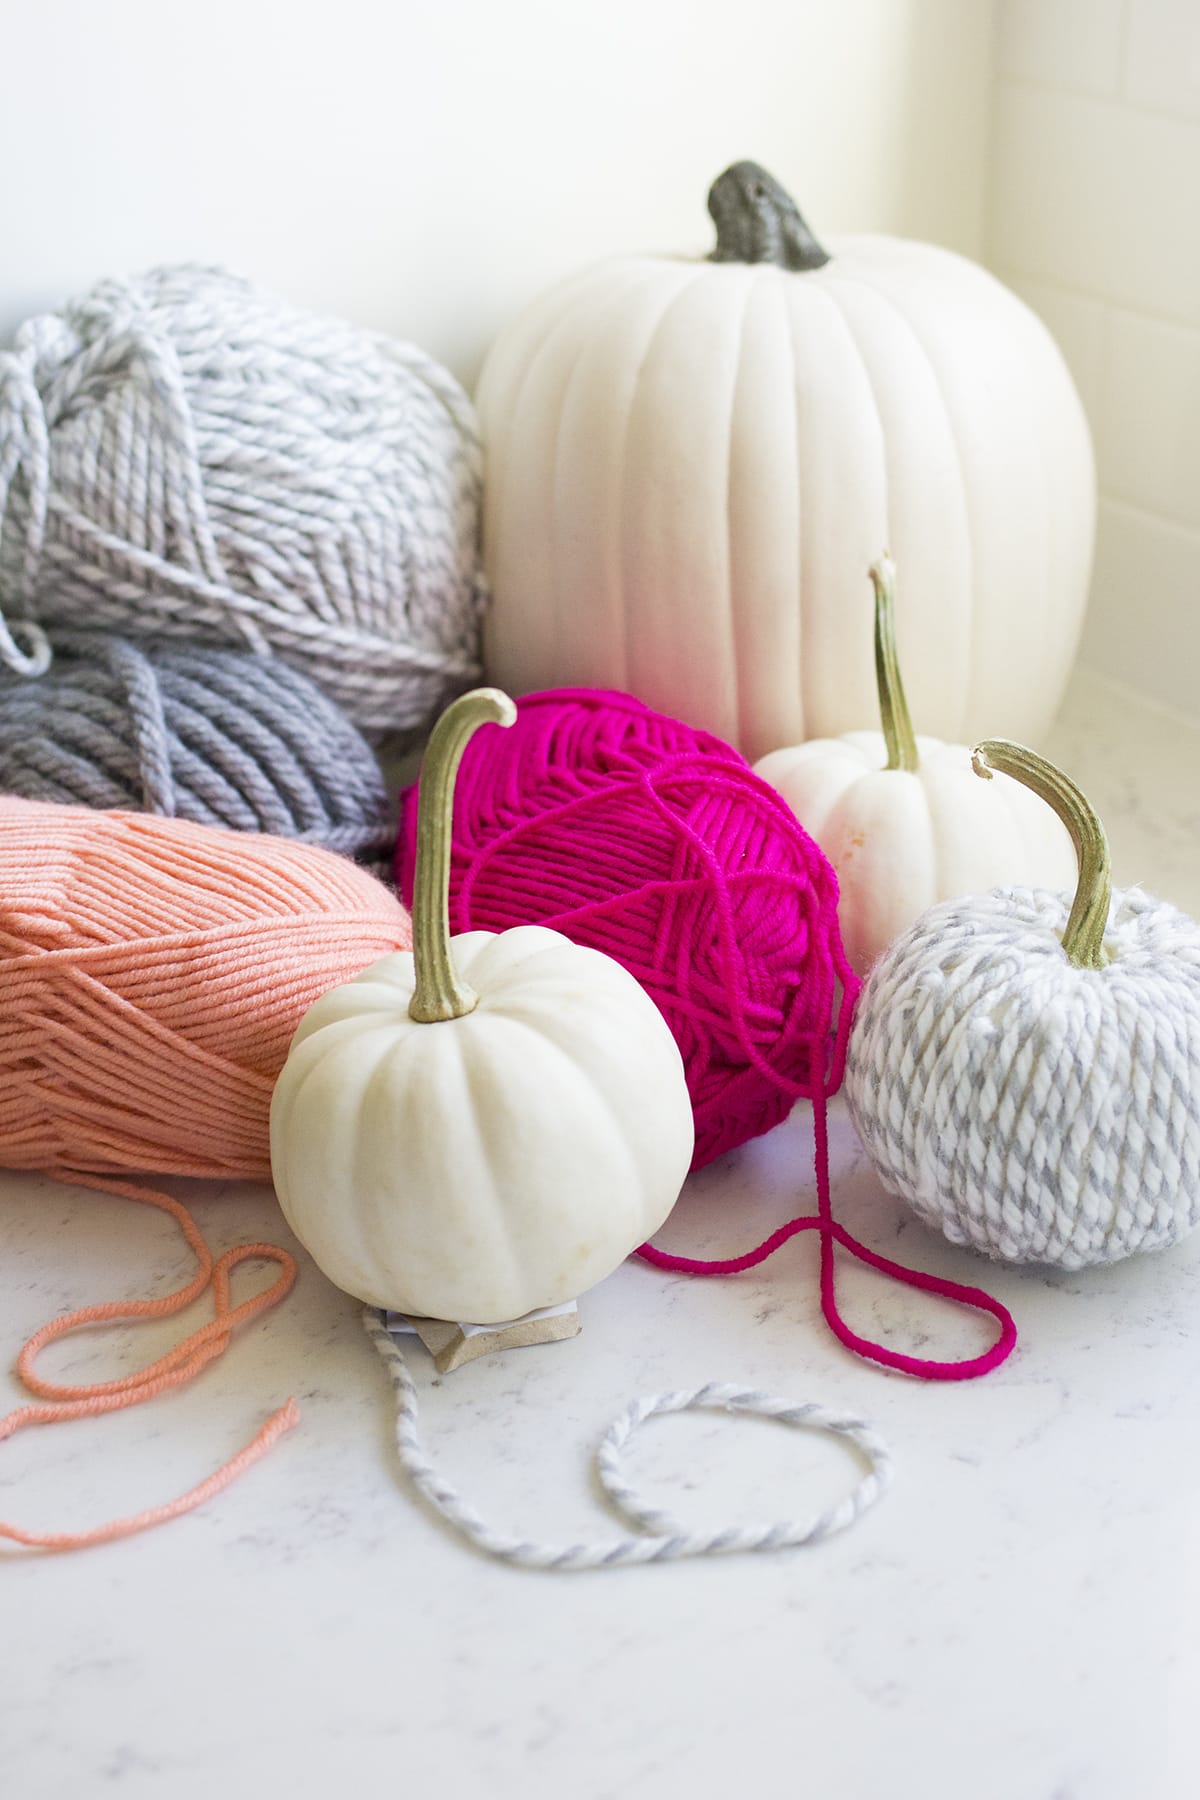 Yarn Covered Pumpkins How-to for Halloween